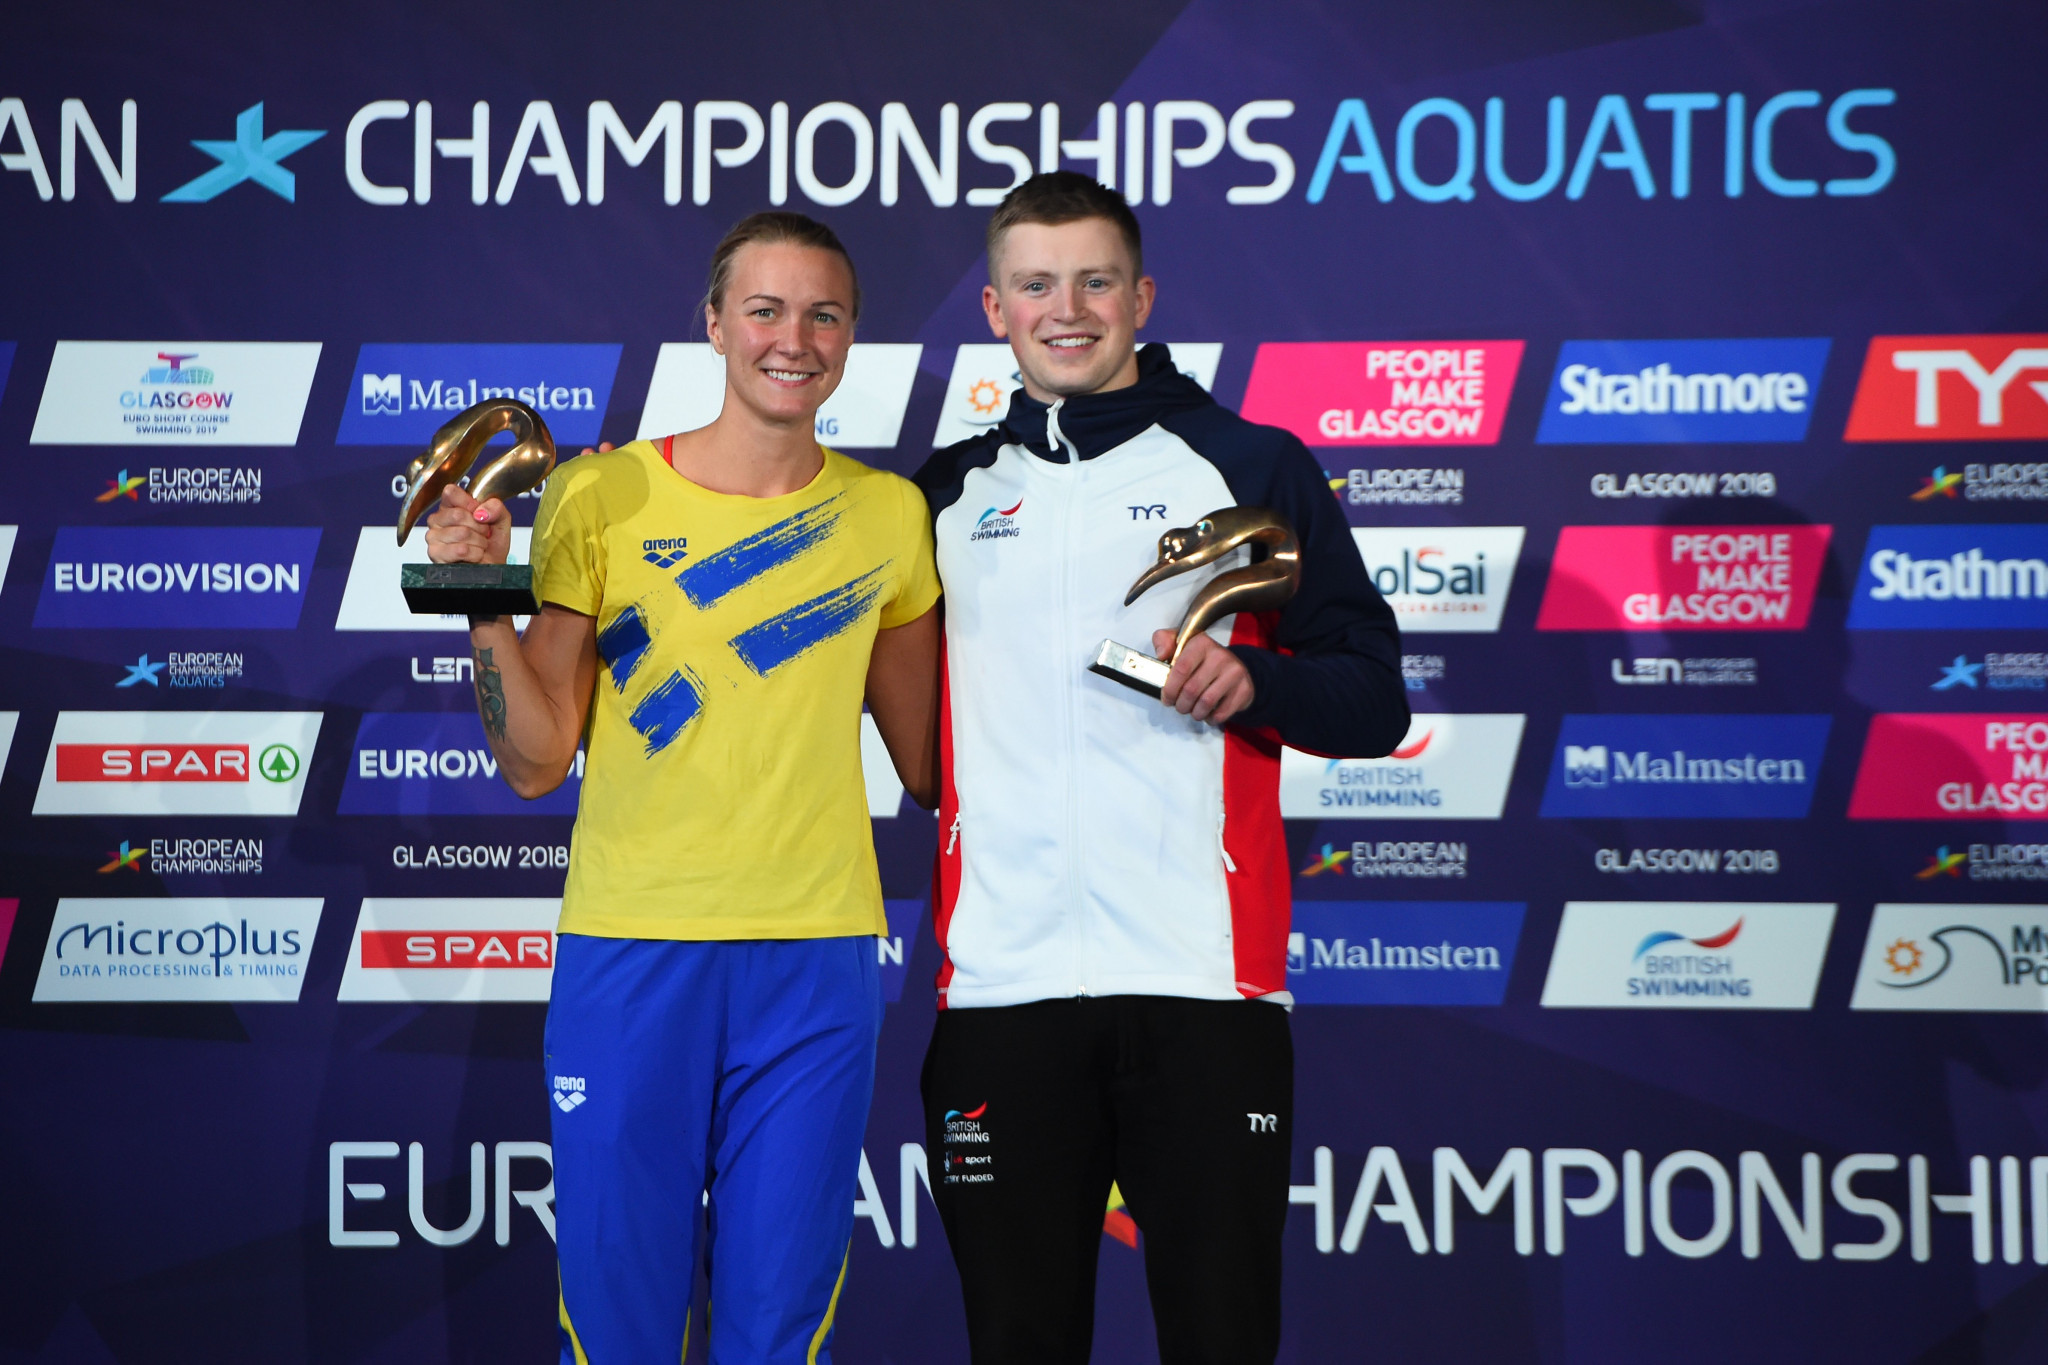 Sweden's Sarah Sjöström and Britain's Adam Peaty were named as swimmers of the Championships ©Getty Images